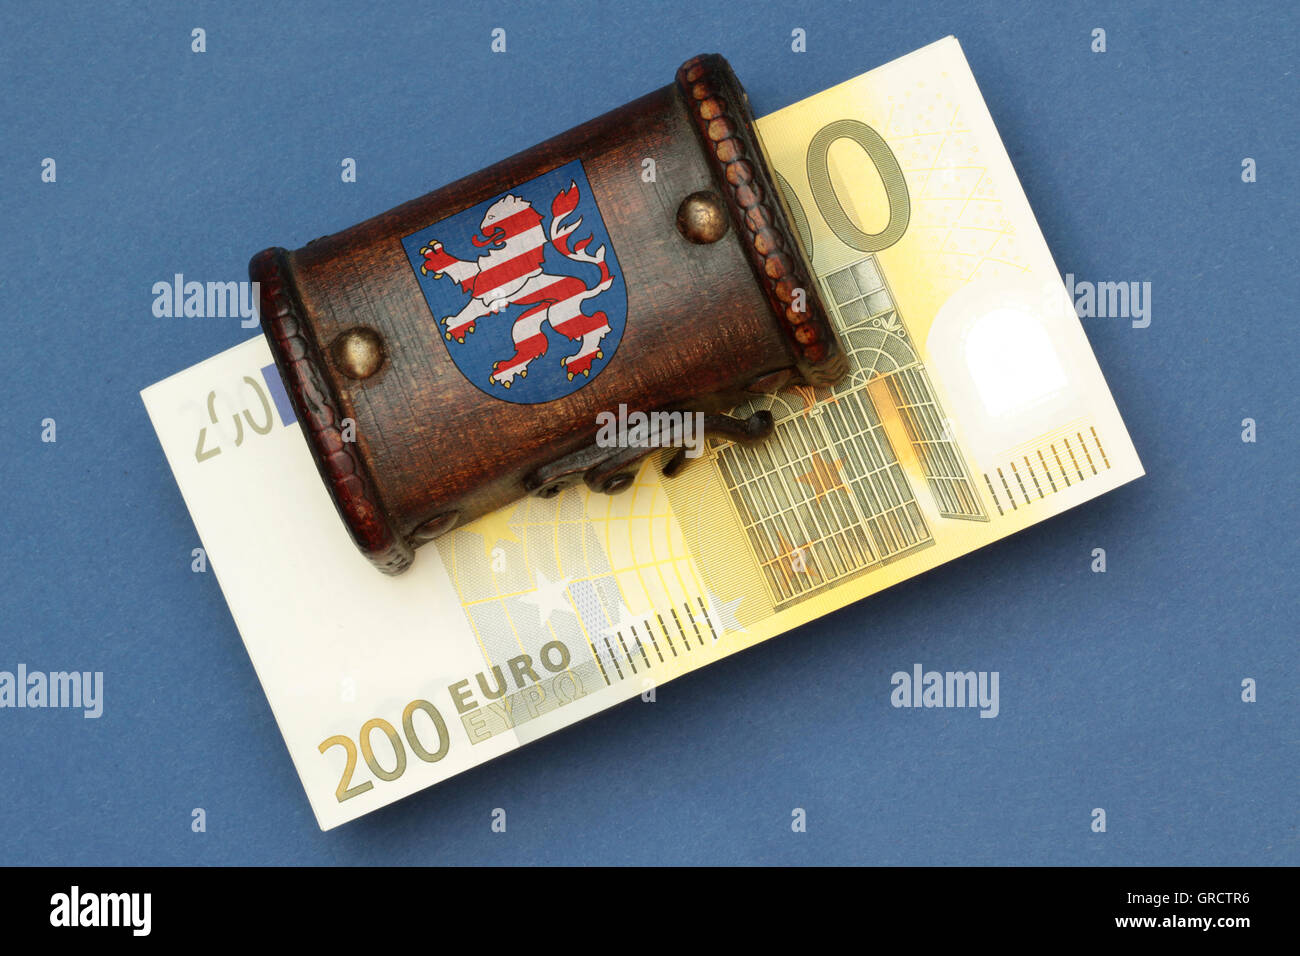 Treasure Chest With Seal Of State Hessen And Euro Bills Stock Photo